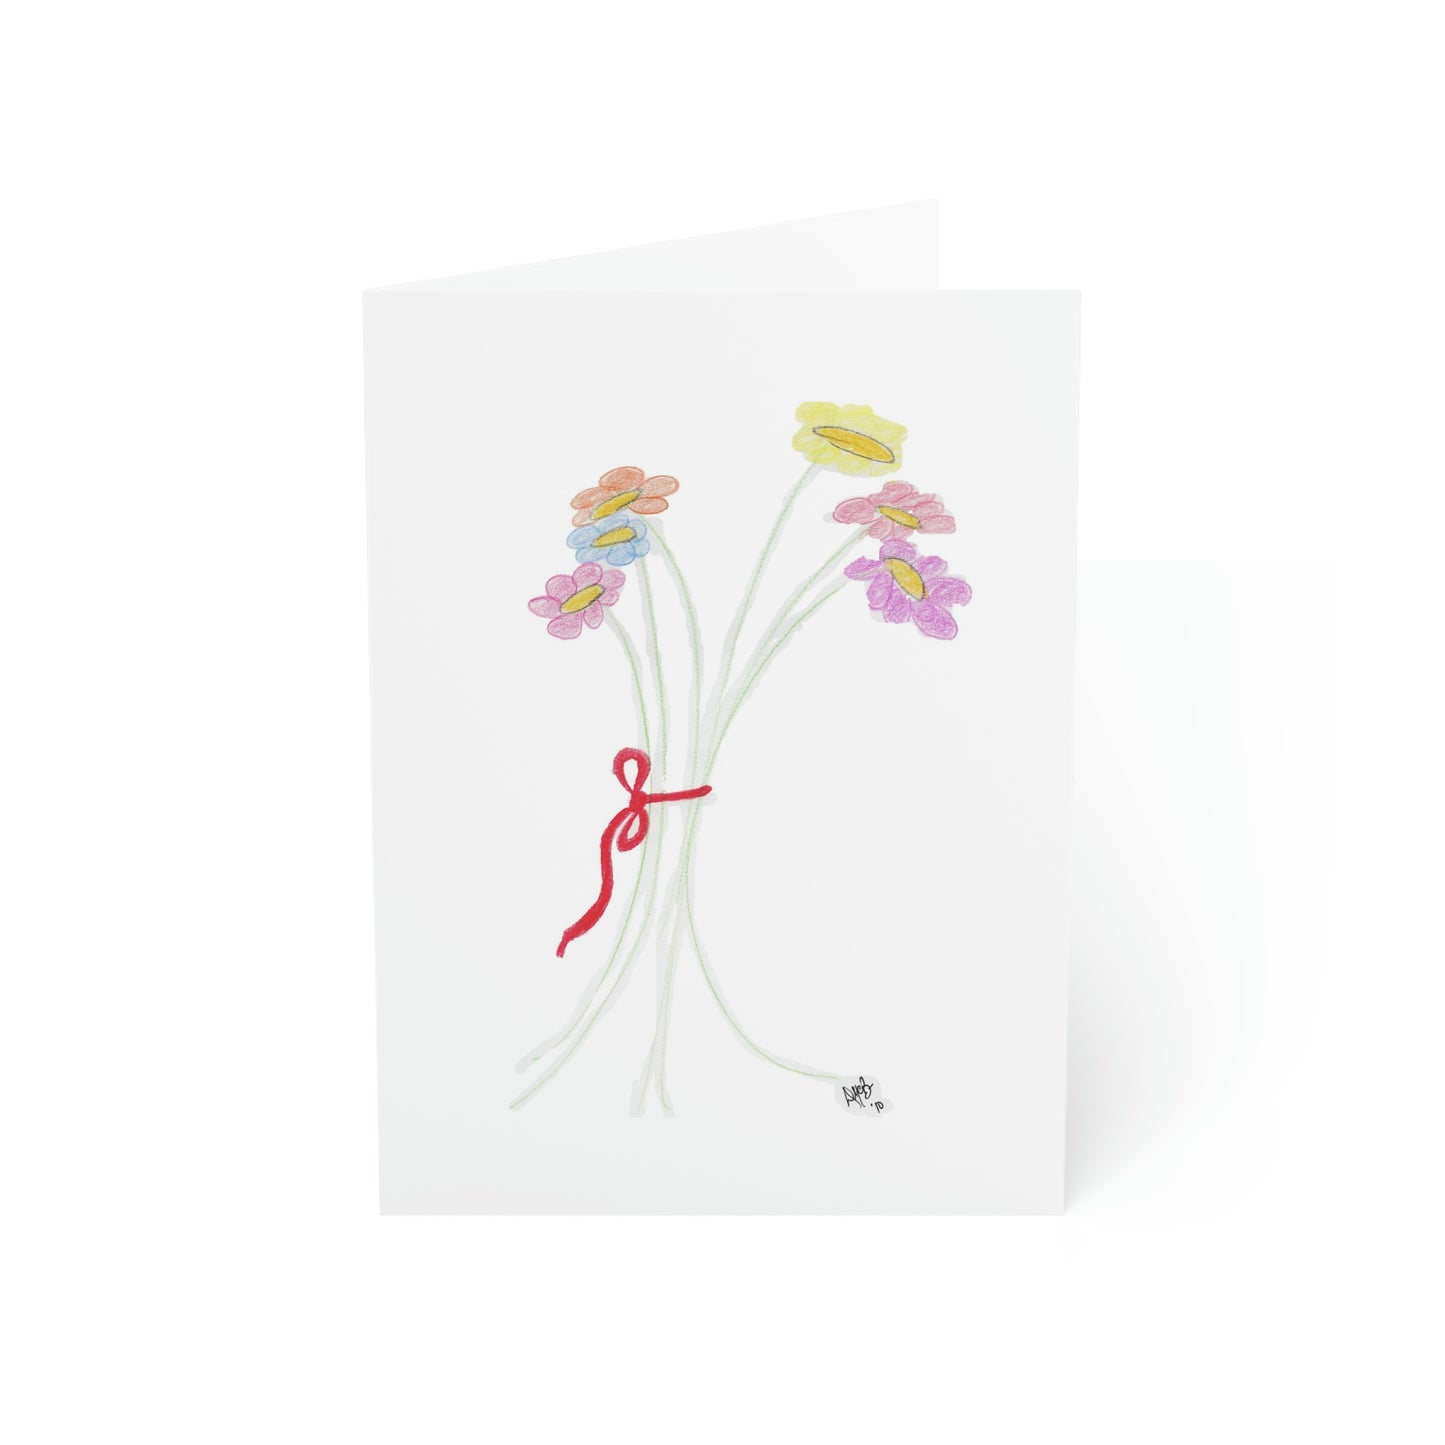 Thinking of You/Miss You - Sending a Bouquet to Help Brighten Your Day - Greeting Cards (1, 10, 30, and 50pcs)